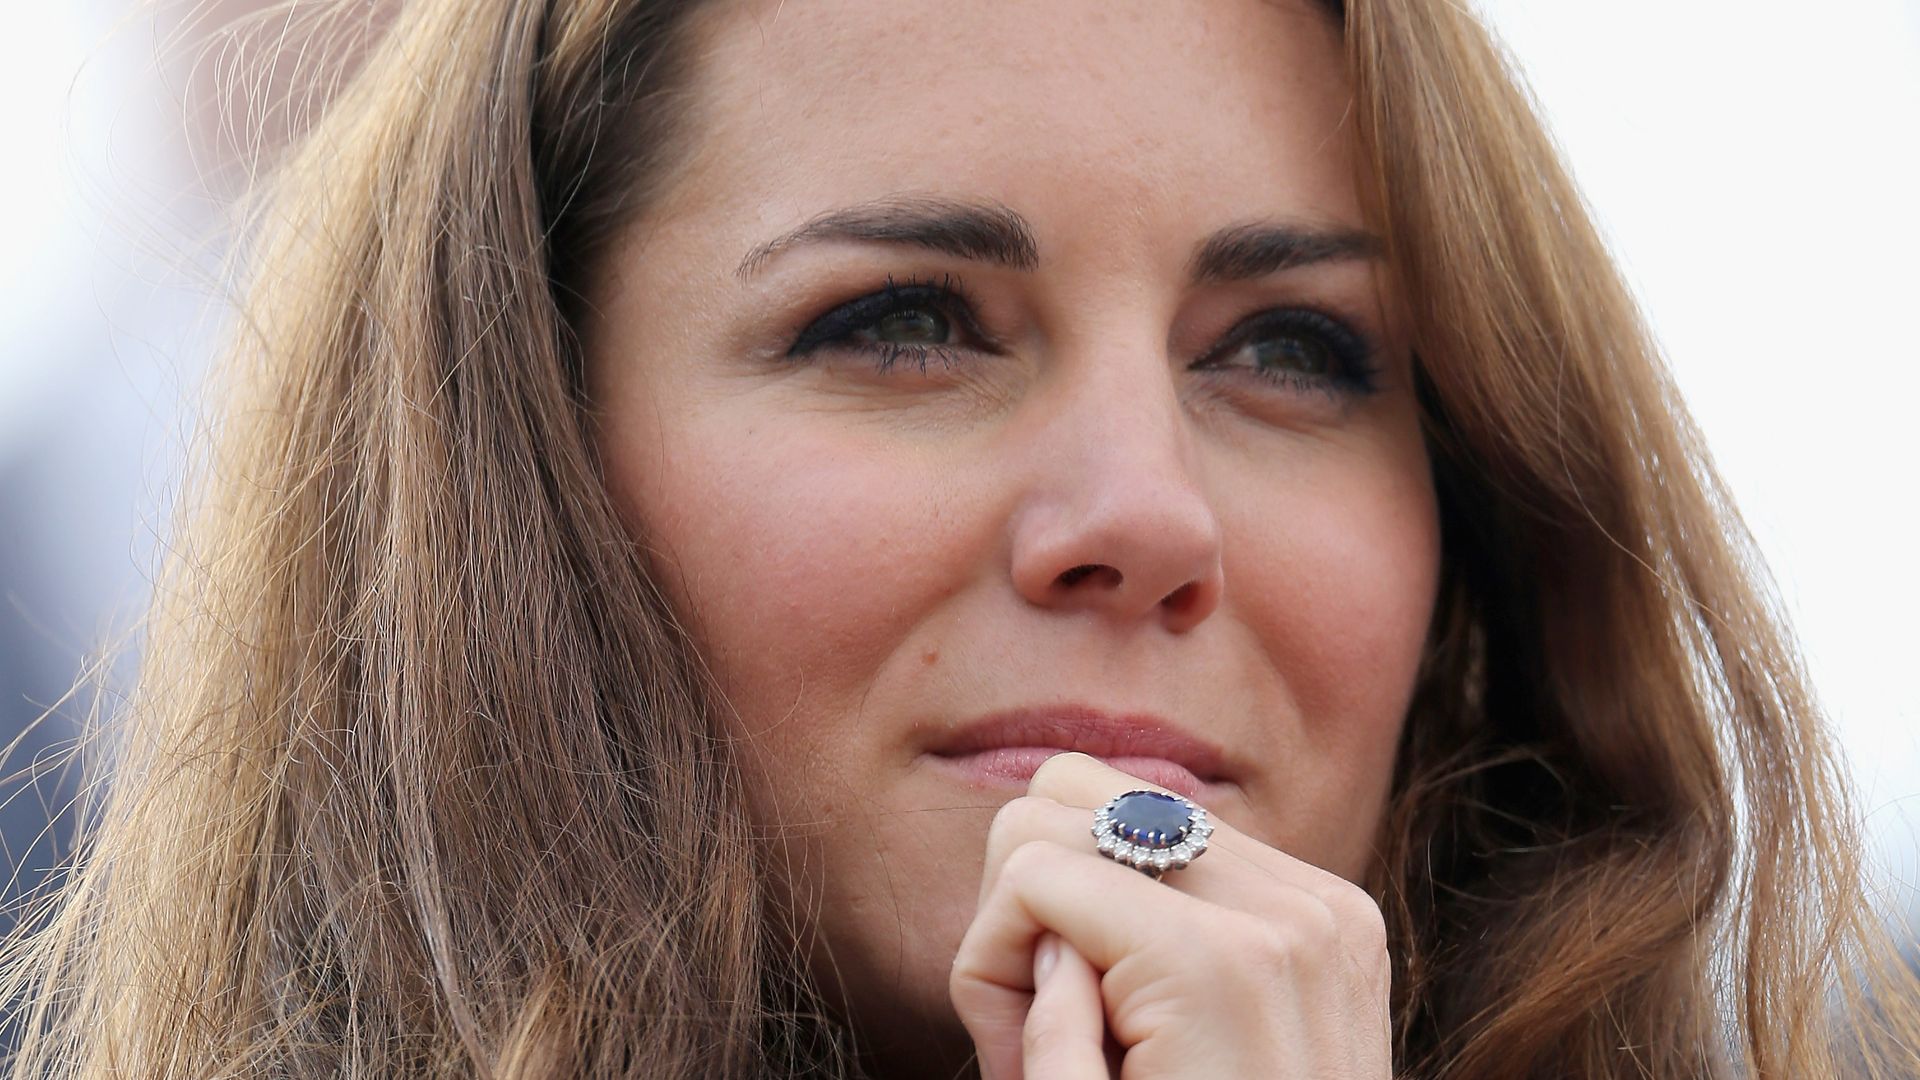 Kate Middleton Engagement Ring: Why The Buzz?